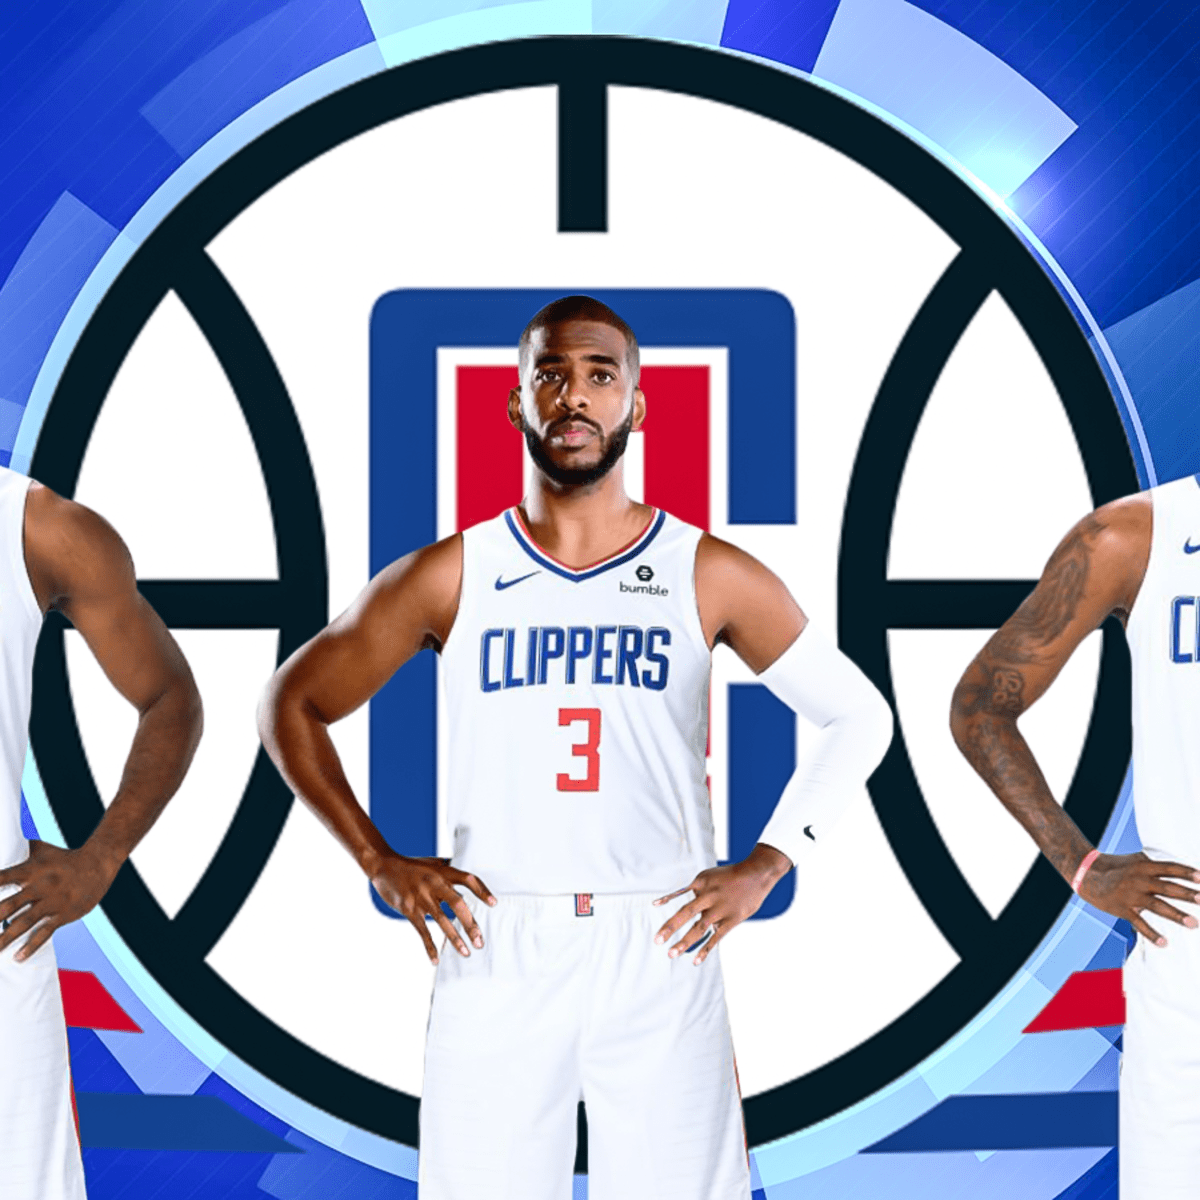 Clippers rumors: Three teams Chris Paul may land on - Page 5